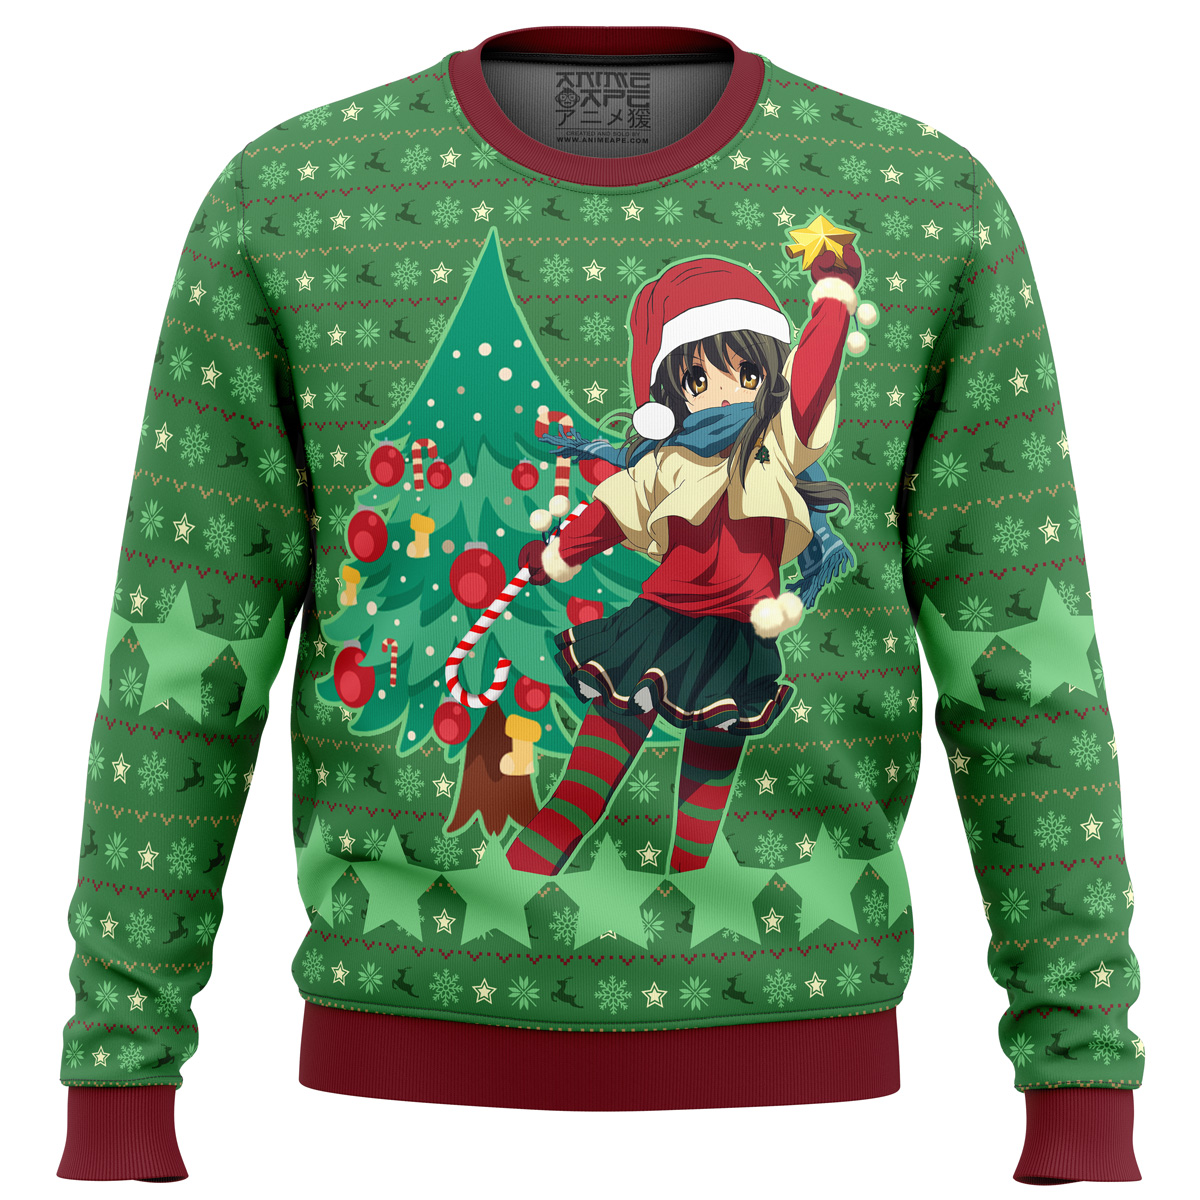 clannad wish upon a star this christmas ugly christmas sweater ana2207 4954 - Fandomaniax Store